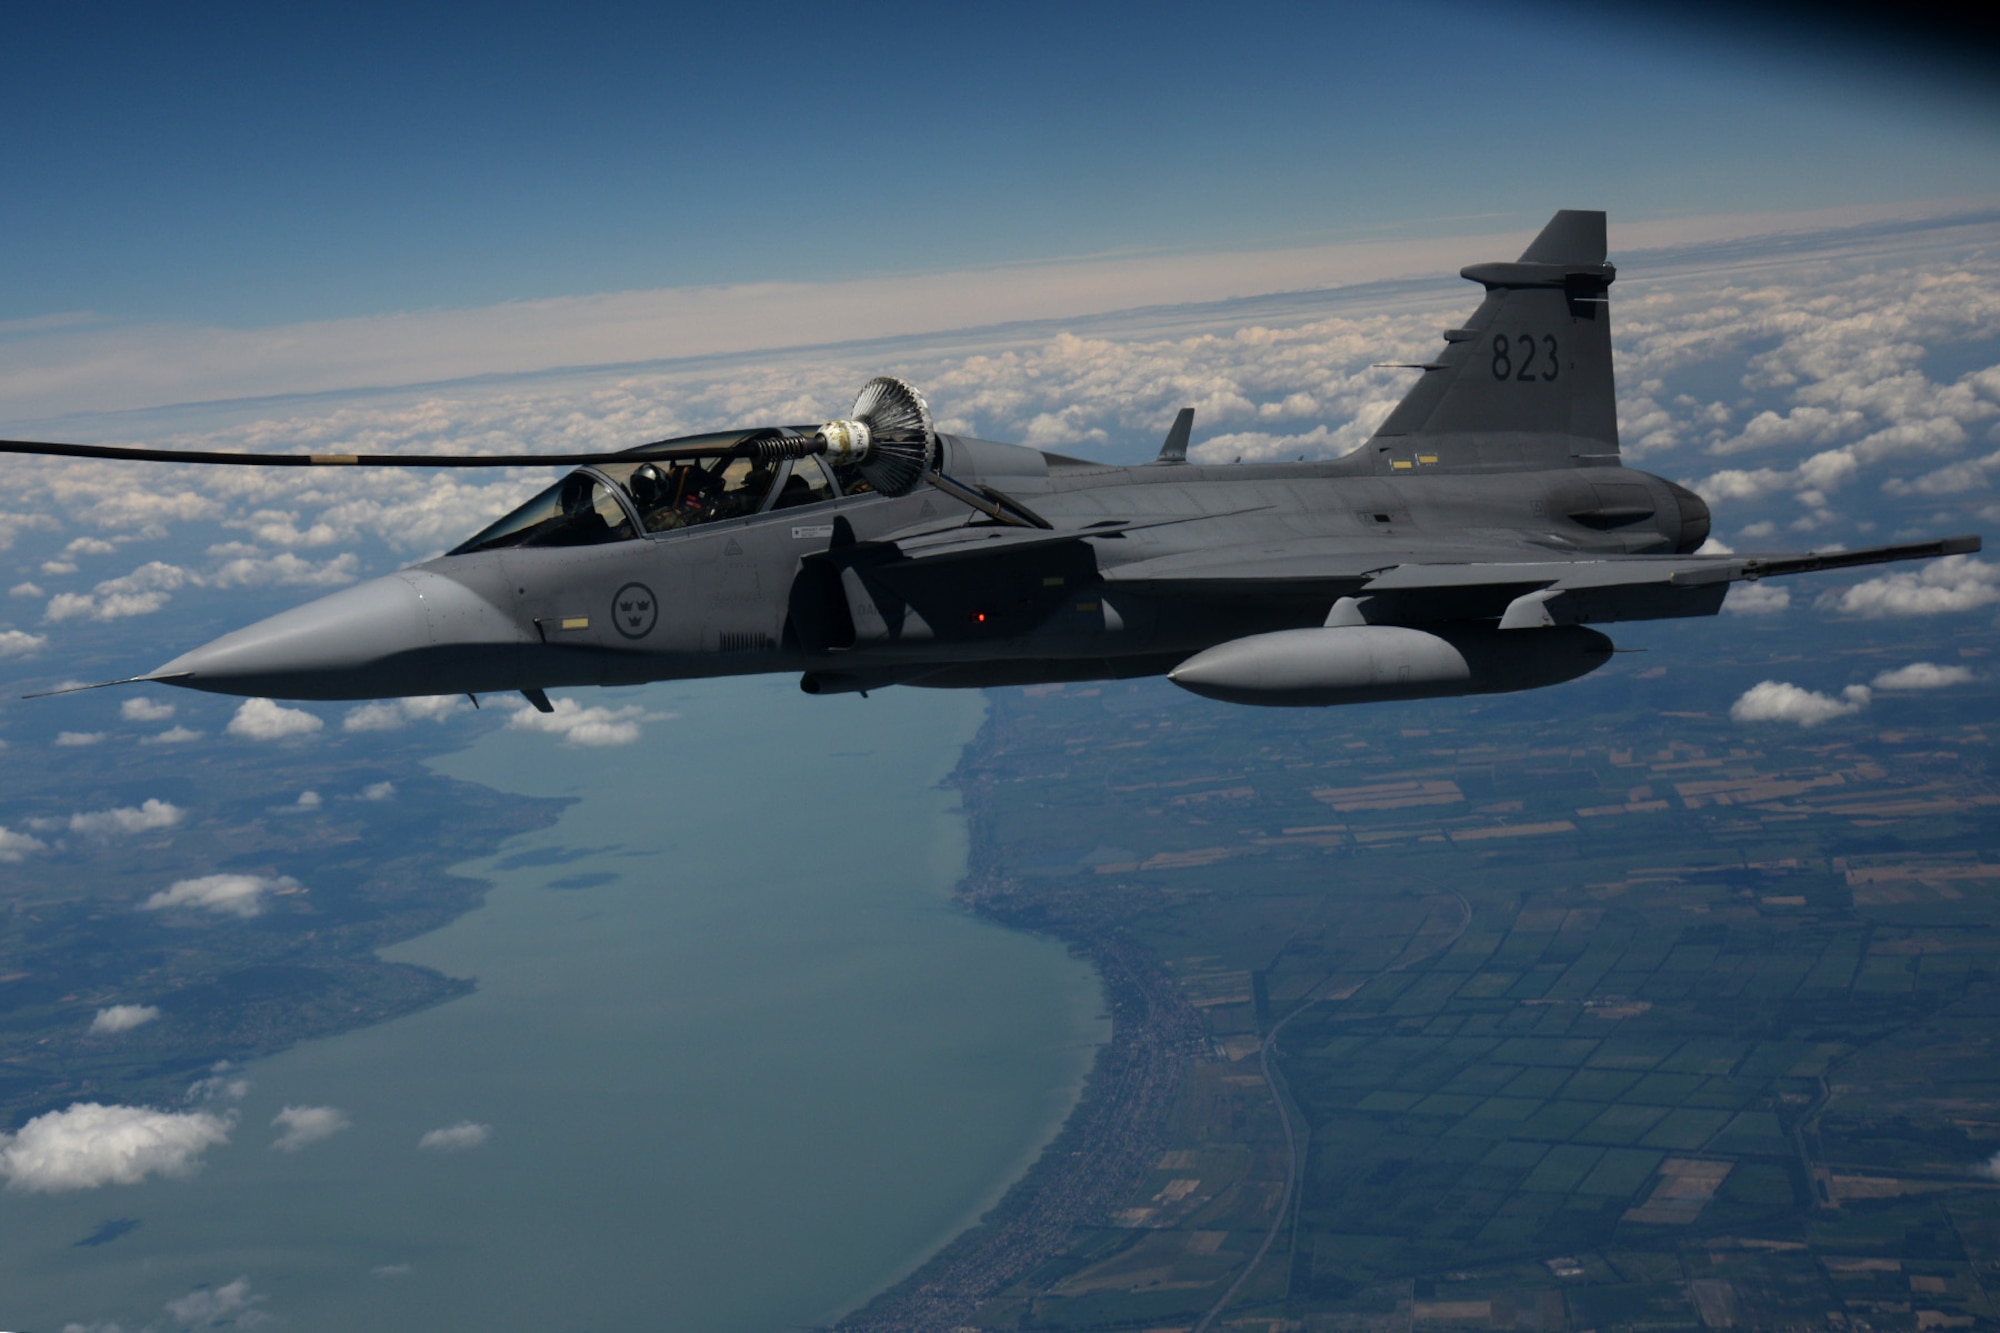 Wrijven Neuken Vergelijken Hungarian air force performs first historic air refueling with help from  NATO ally, partner > U.S. Air Forces in Europe & Air Forces Africa > News